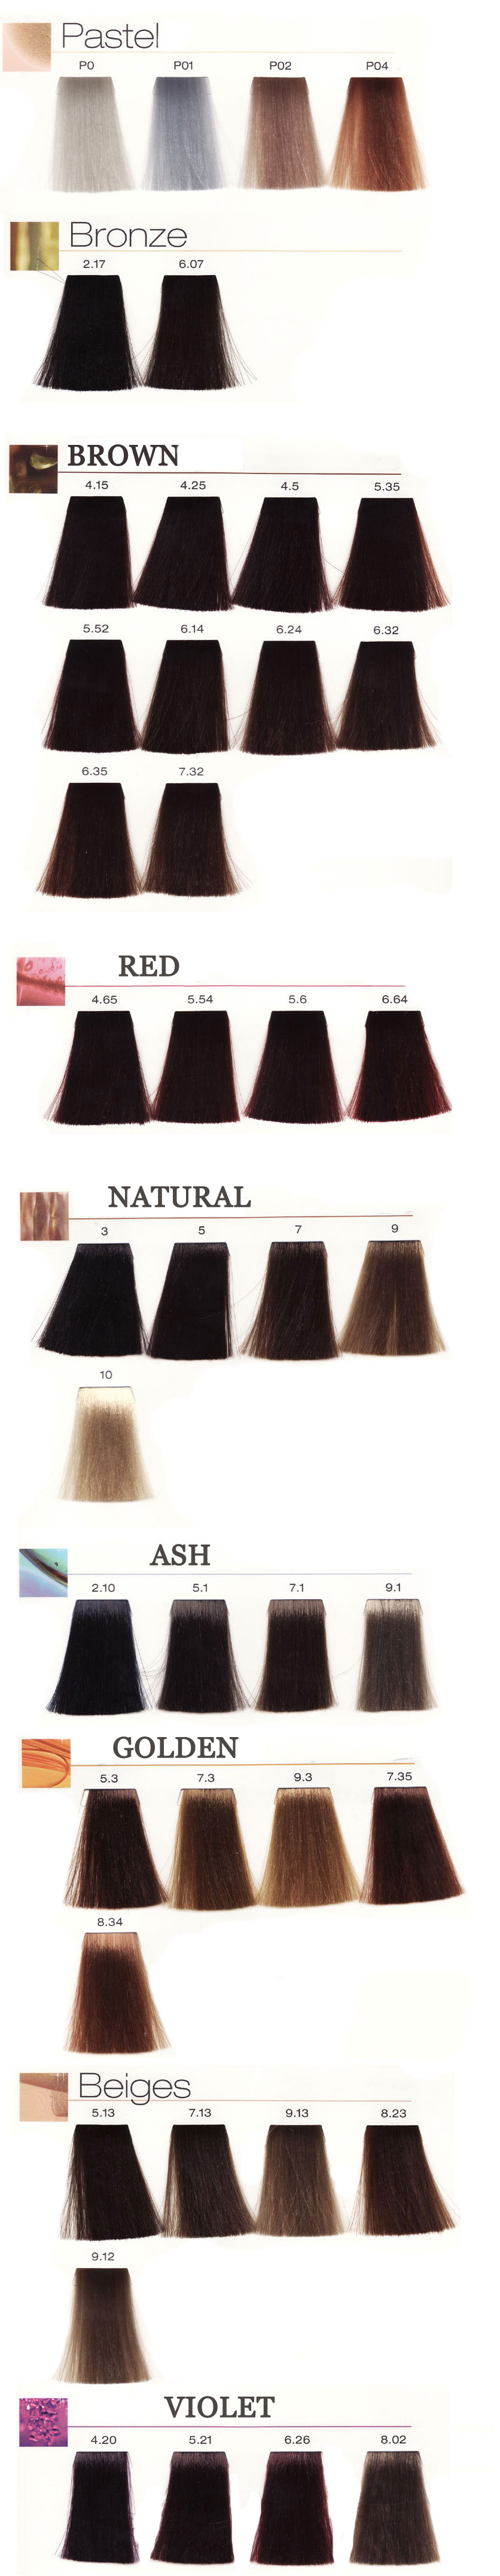 Loreal Luo Color Chart